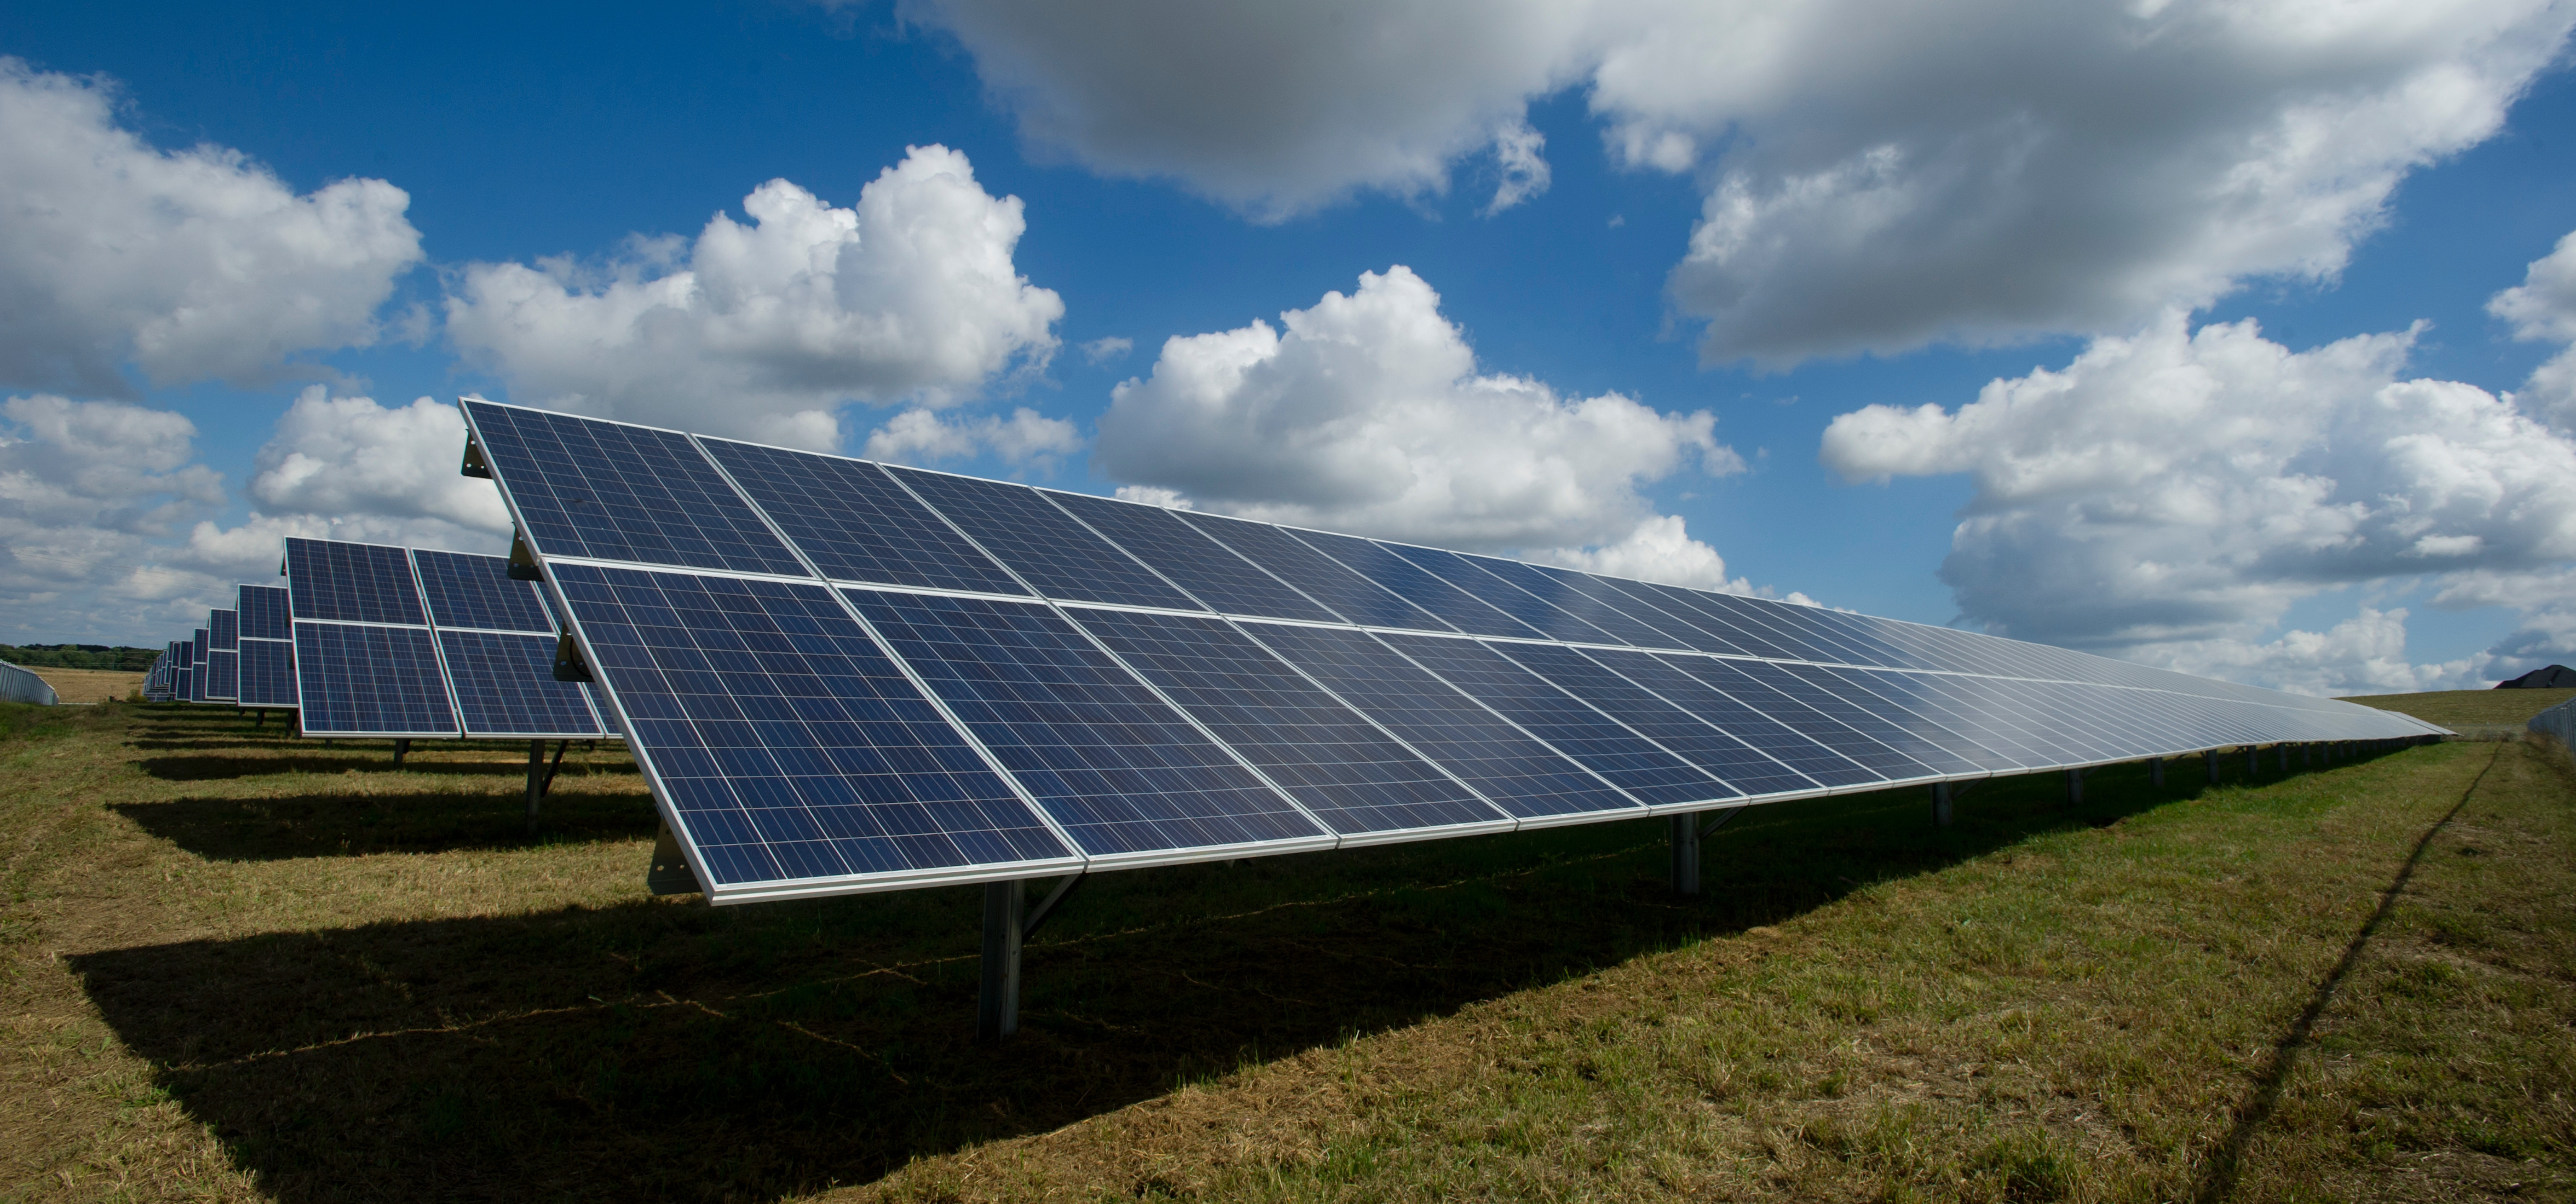 5 Important Highlights From the Proposed Photovoltaic Modules Regulations